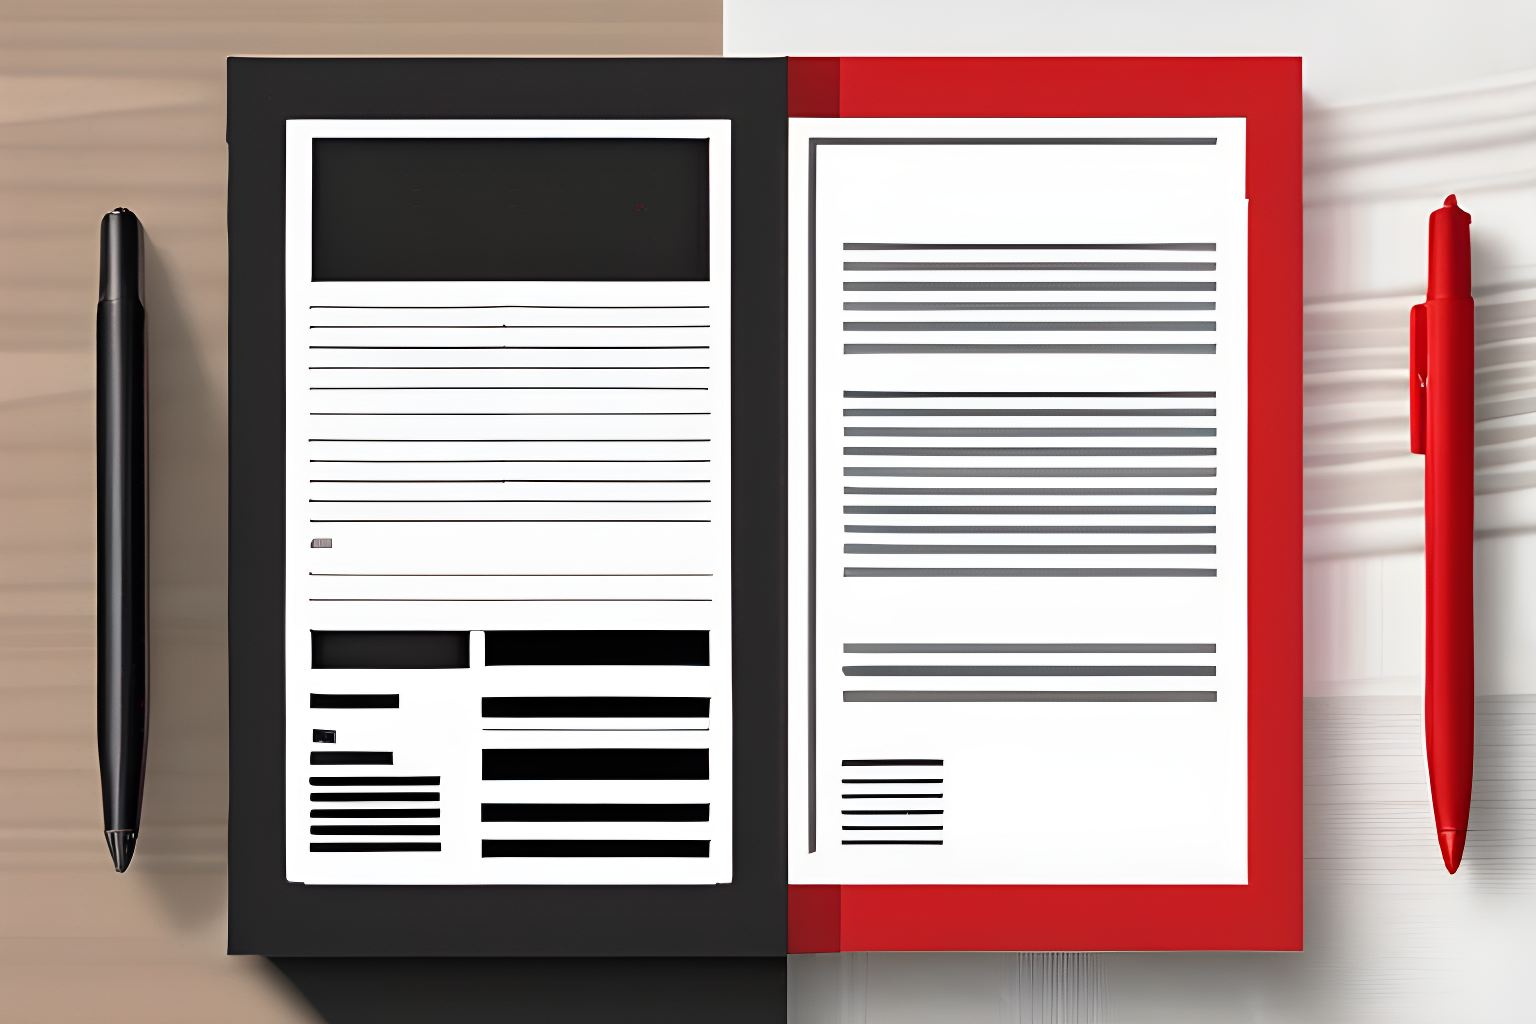 Generate an image featuring two documents side by side on a table. The first document should have black ink on white paper, and the second document should be an identical replica but with red ink on white paper.